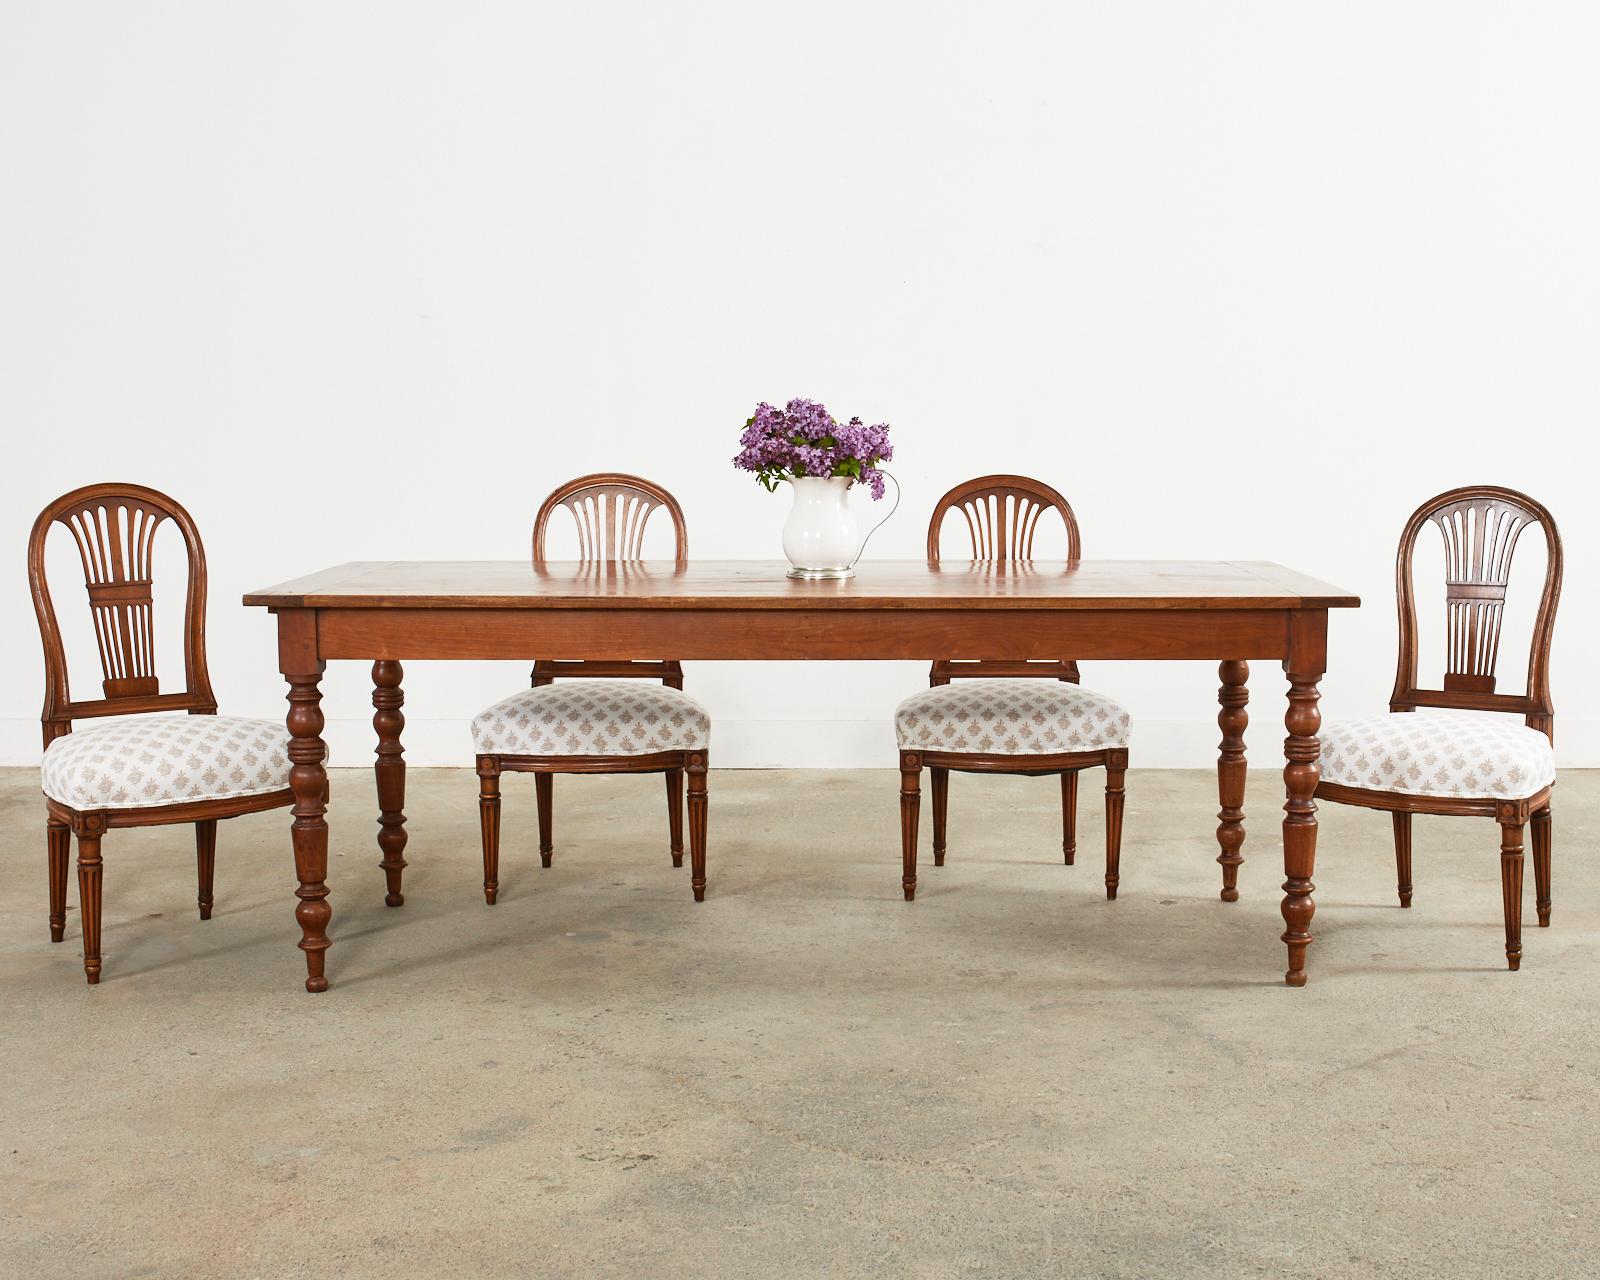 Distinctive set of six French dining chairs hand-crafted from walnut. The chairs feature a graceful balloon back in the grand Louis XVI style. The generous seats have been newly upholstered and the seat is supported by tapered and fluted legs. The